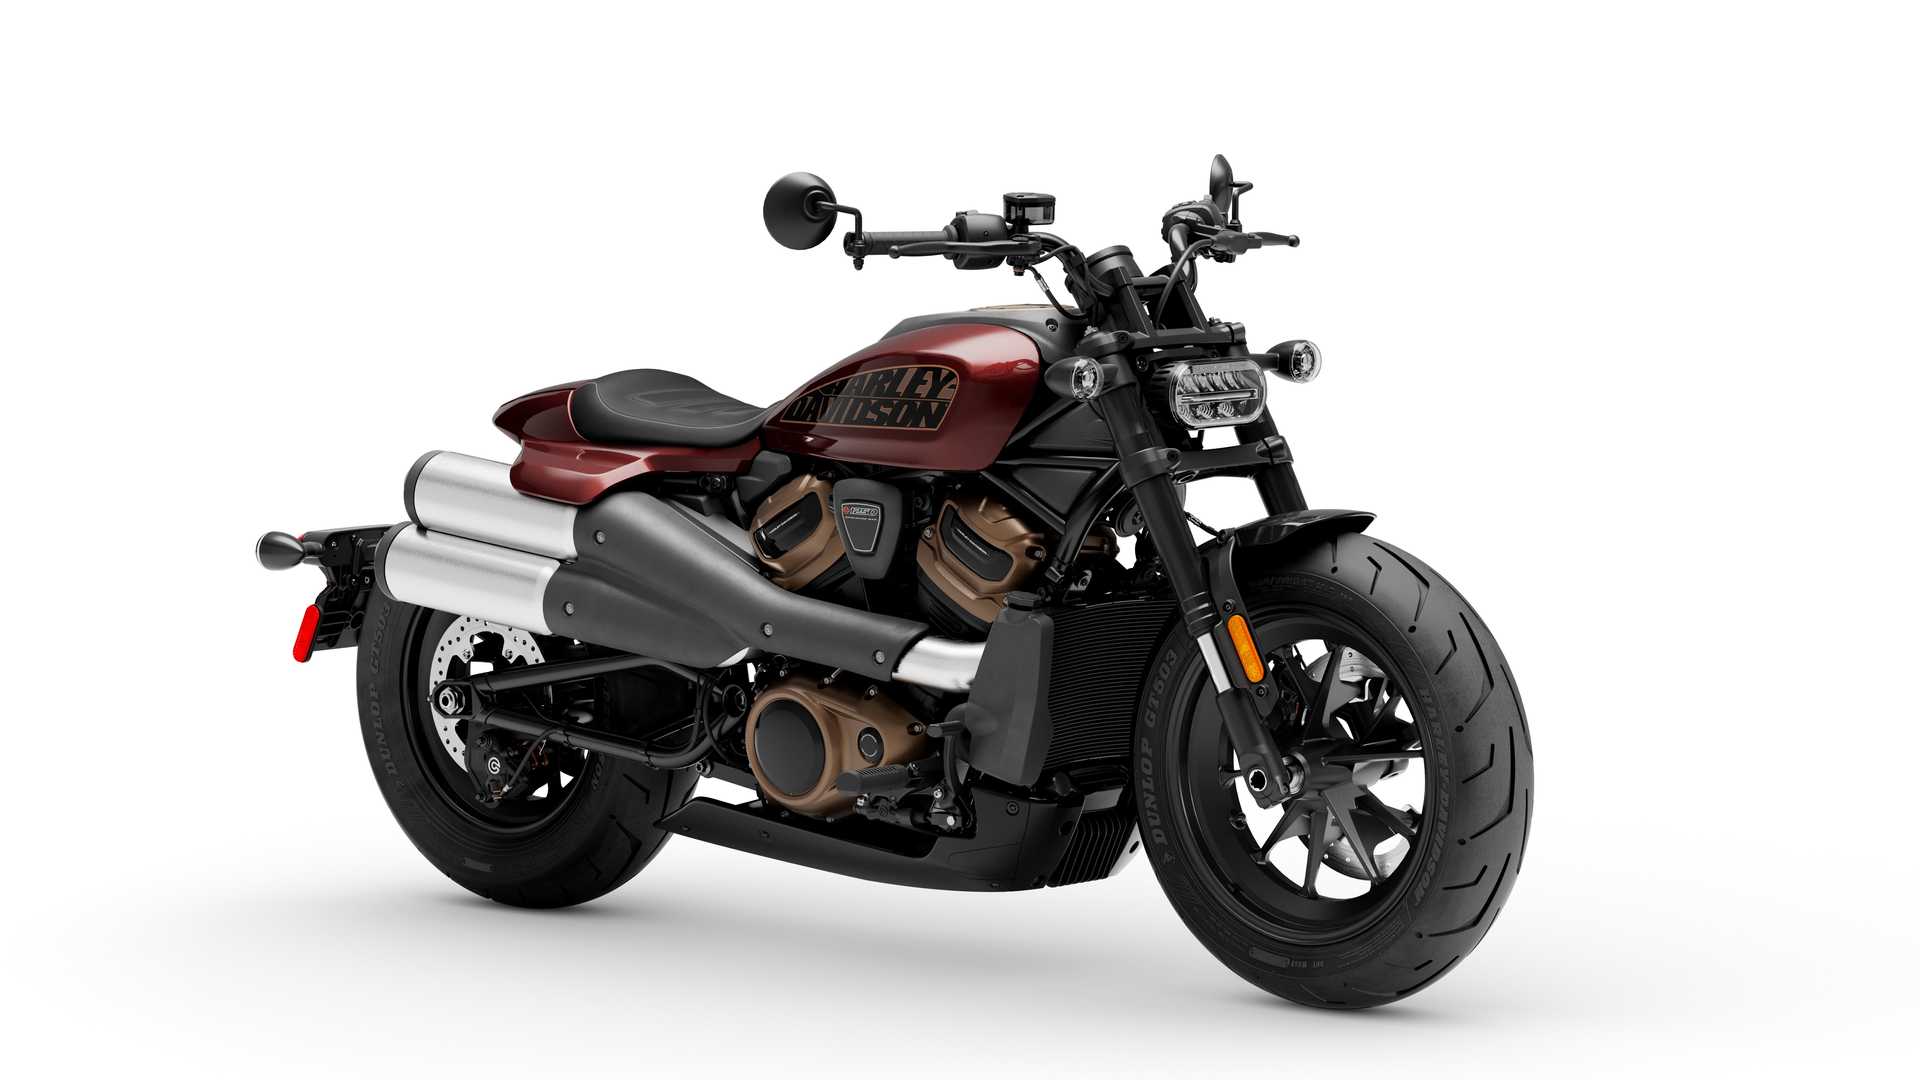 Harley Davidson Lifts Curtain Over Its New 2021 1250 Sportser S